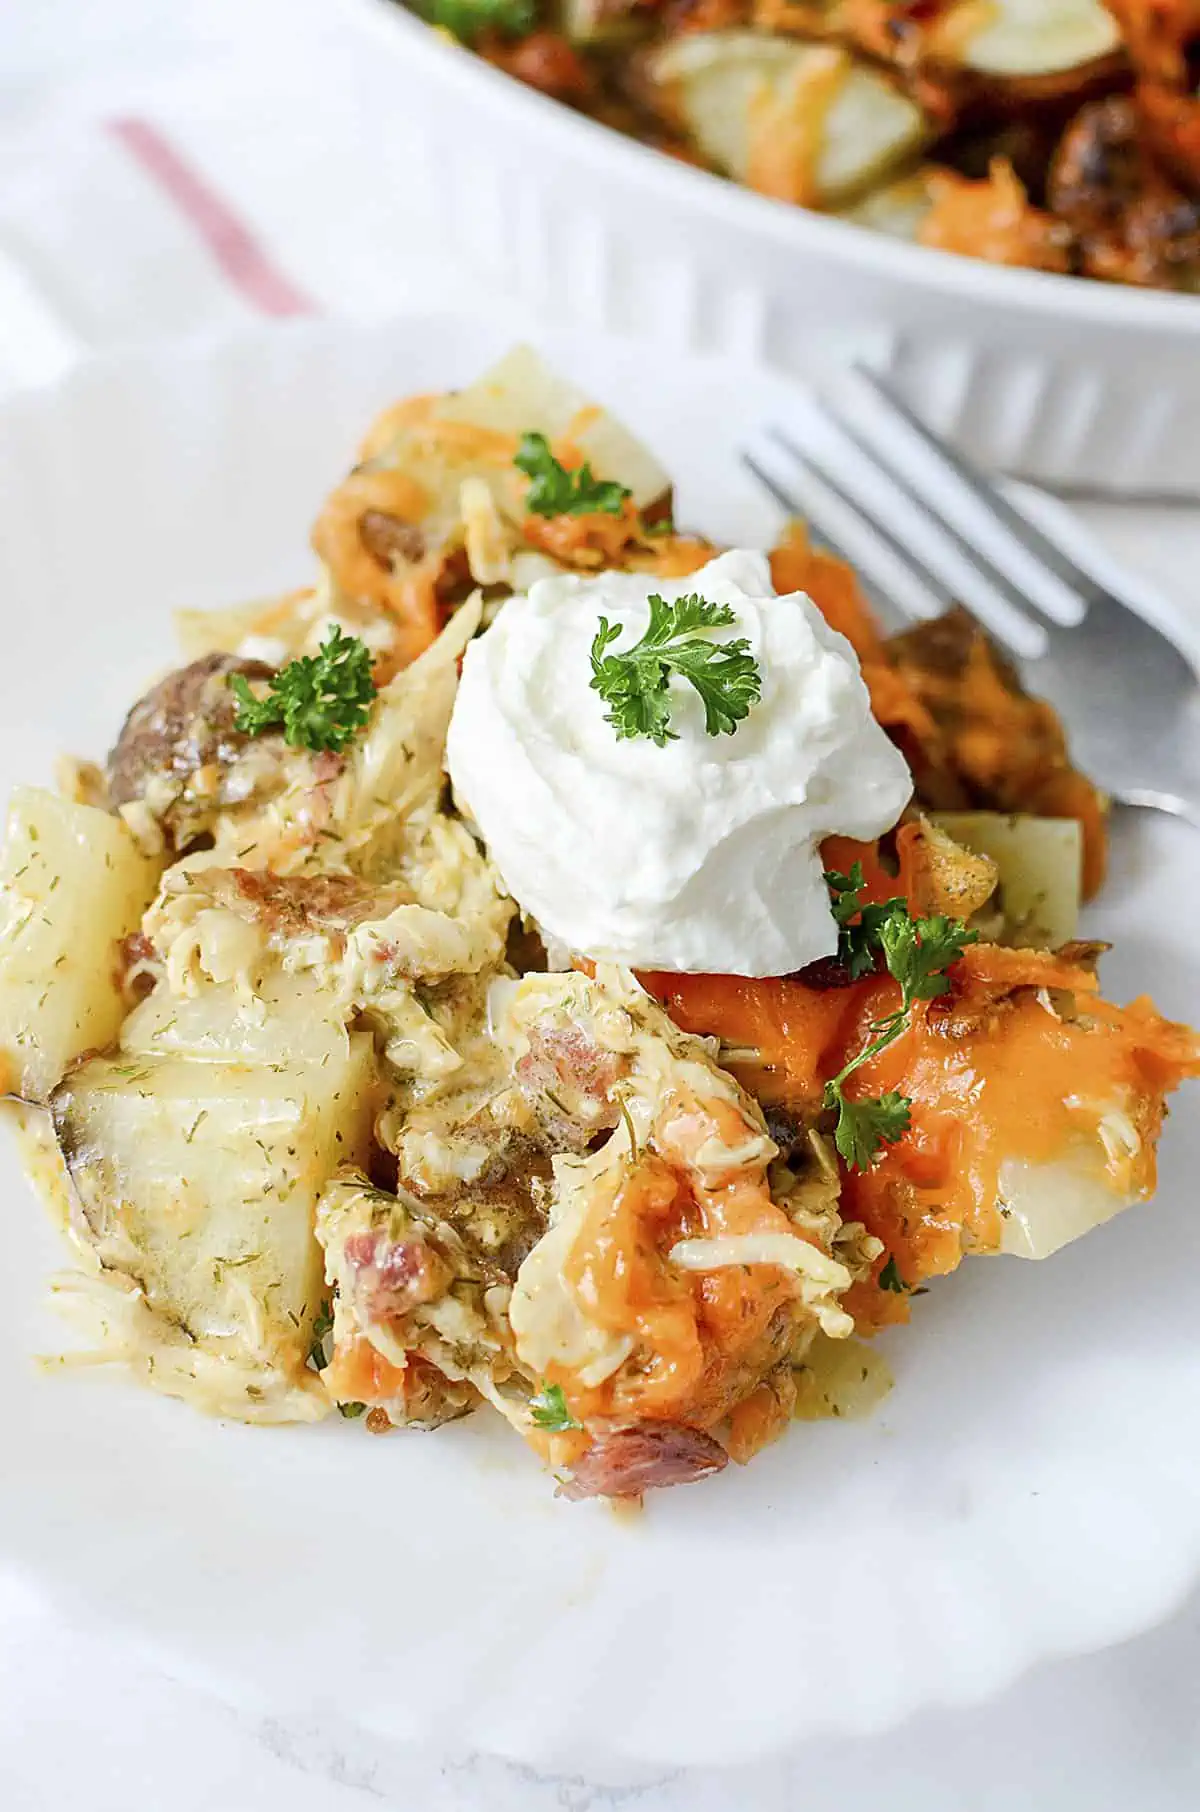 A serving of the bacon ranch potato bake on a white plate with sour cream dolloped on top.